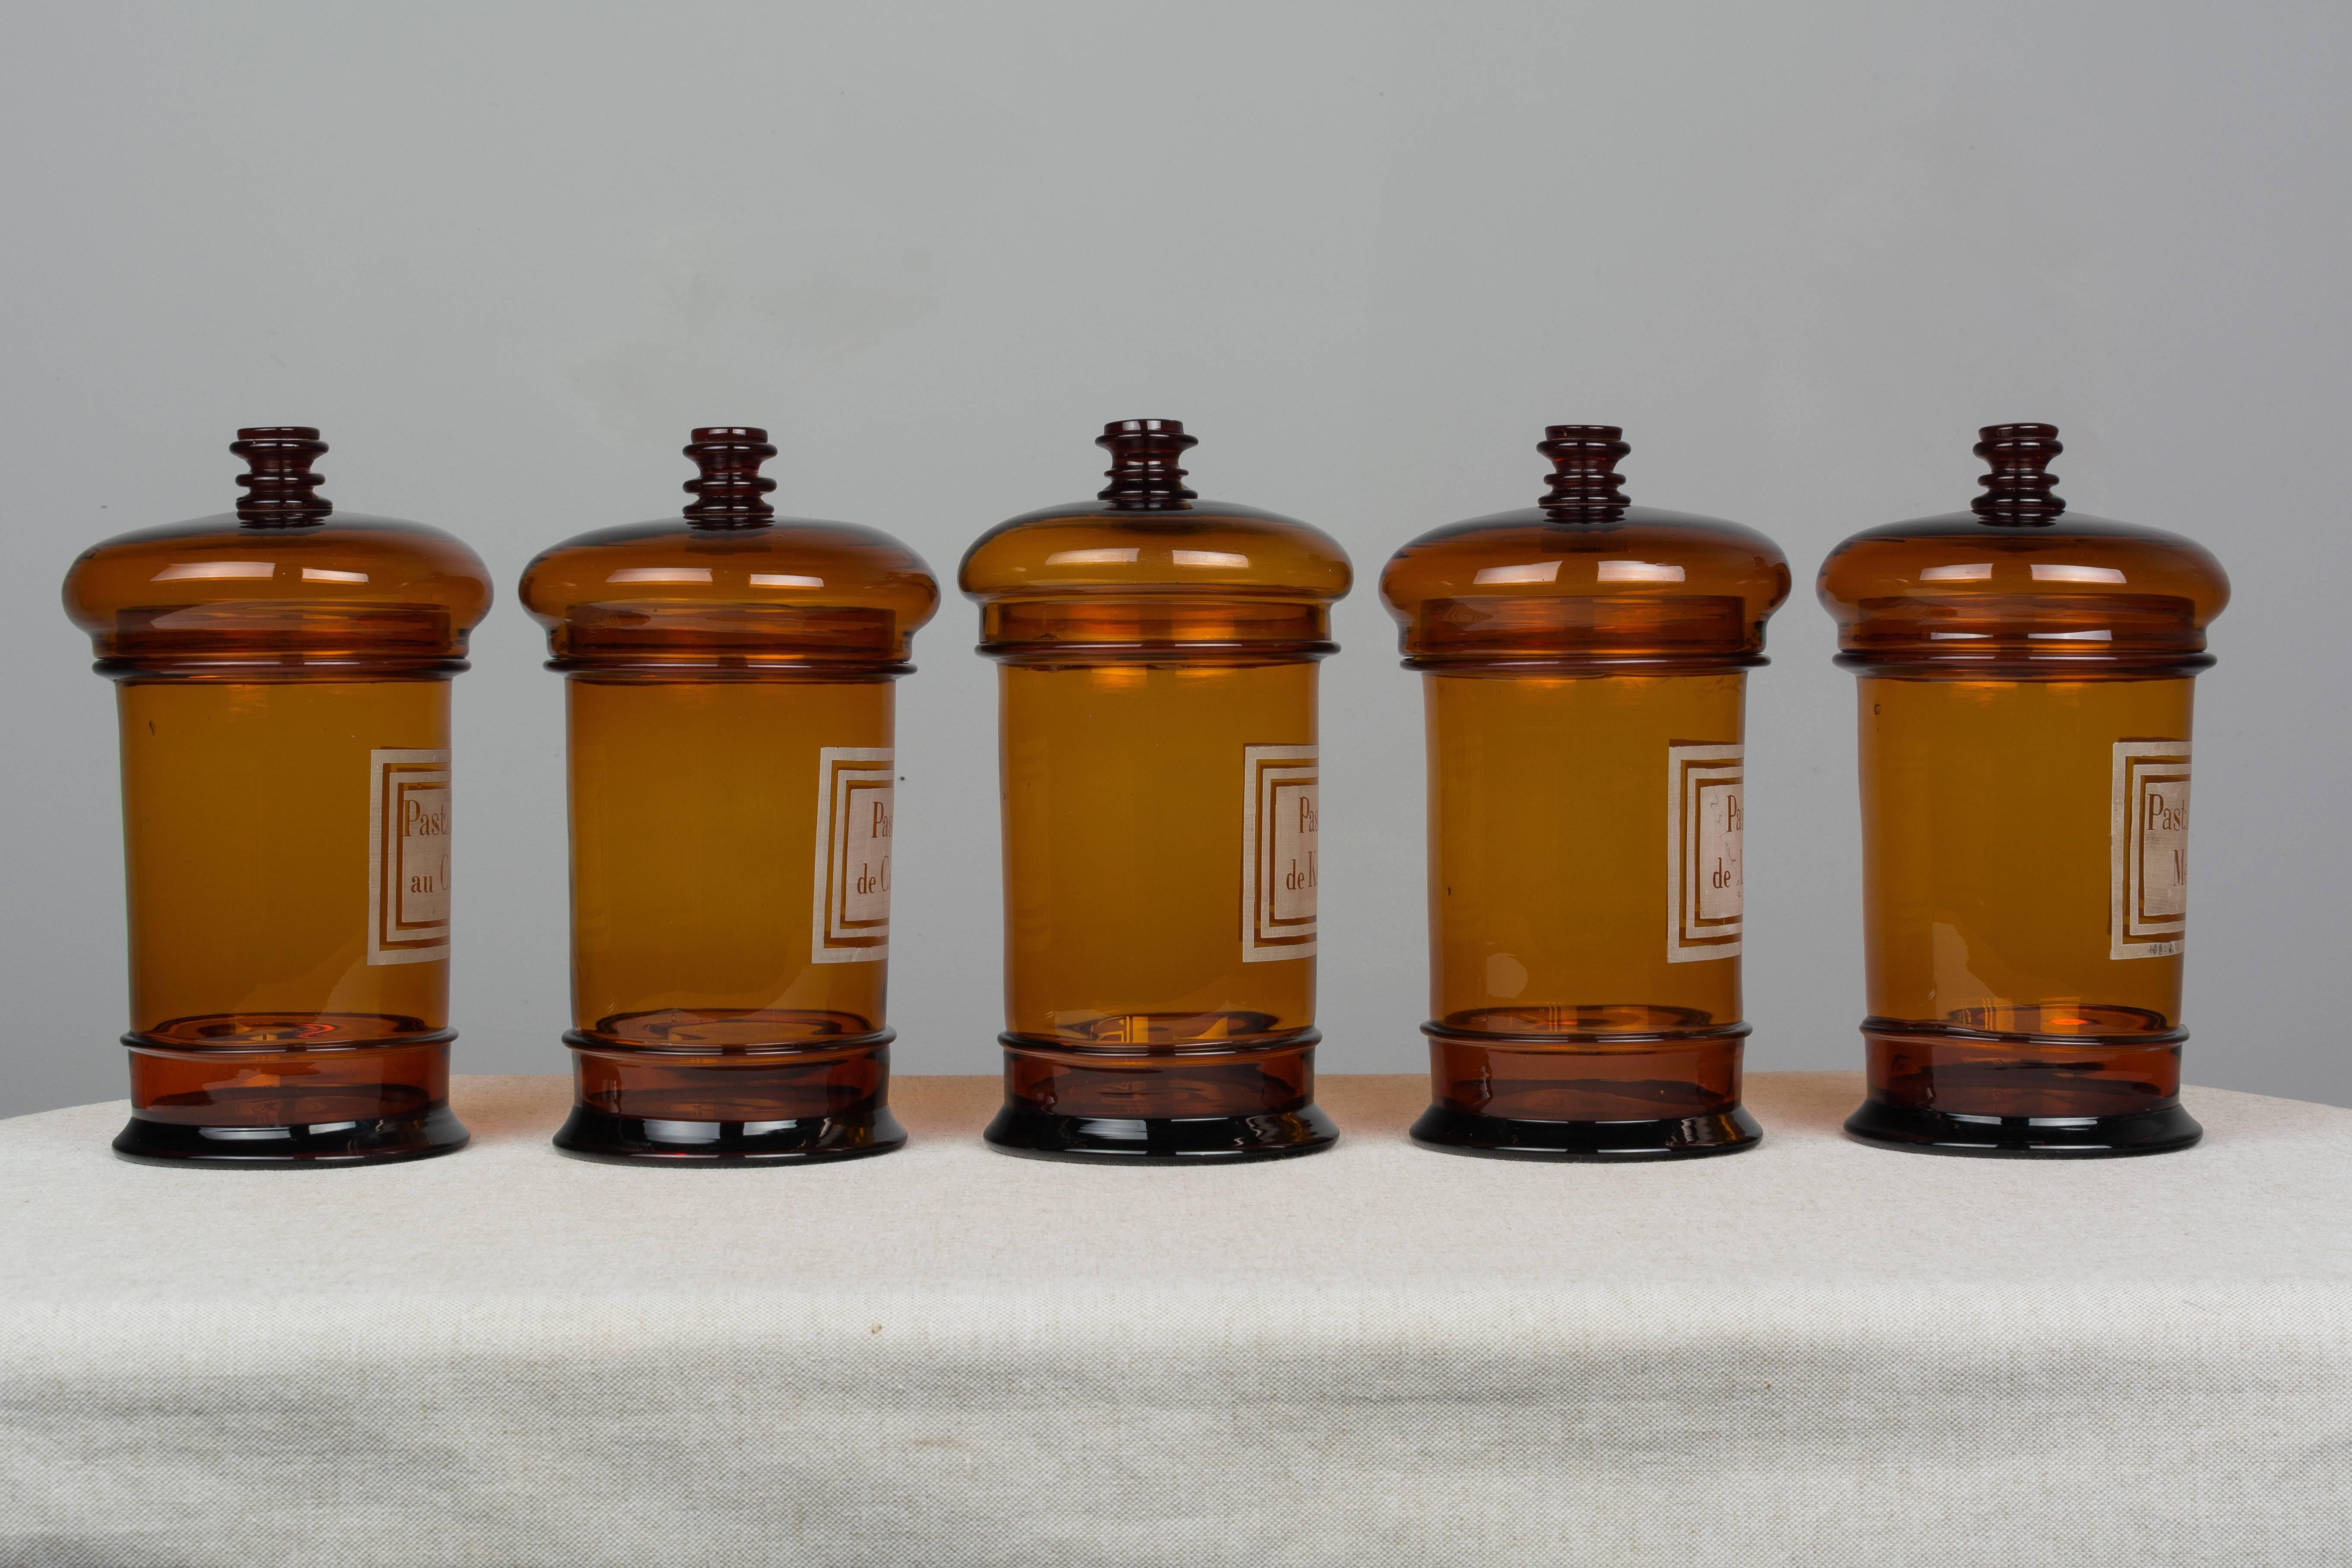 A set of five 19th century French amber glass apothecary jars with white stenciled labels and their lids. In excellent condition. Please refer to photos for more details. We have a large selection of French antiques at Olivier Fleury, Inc.  Please